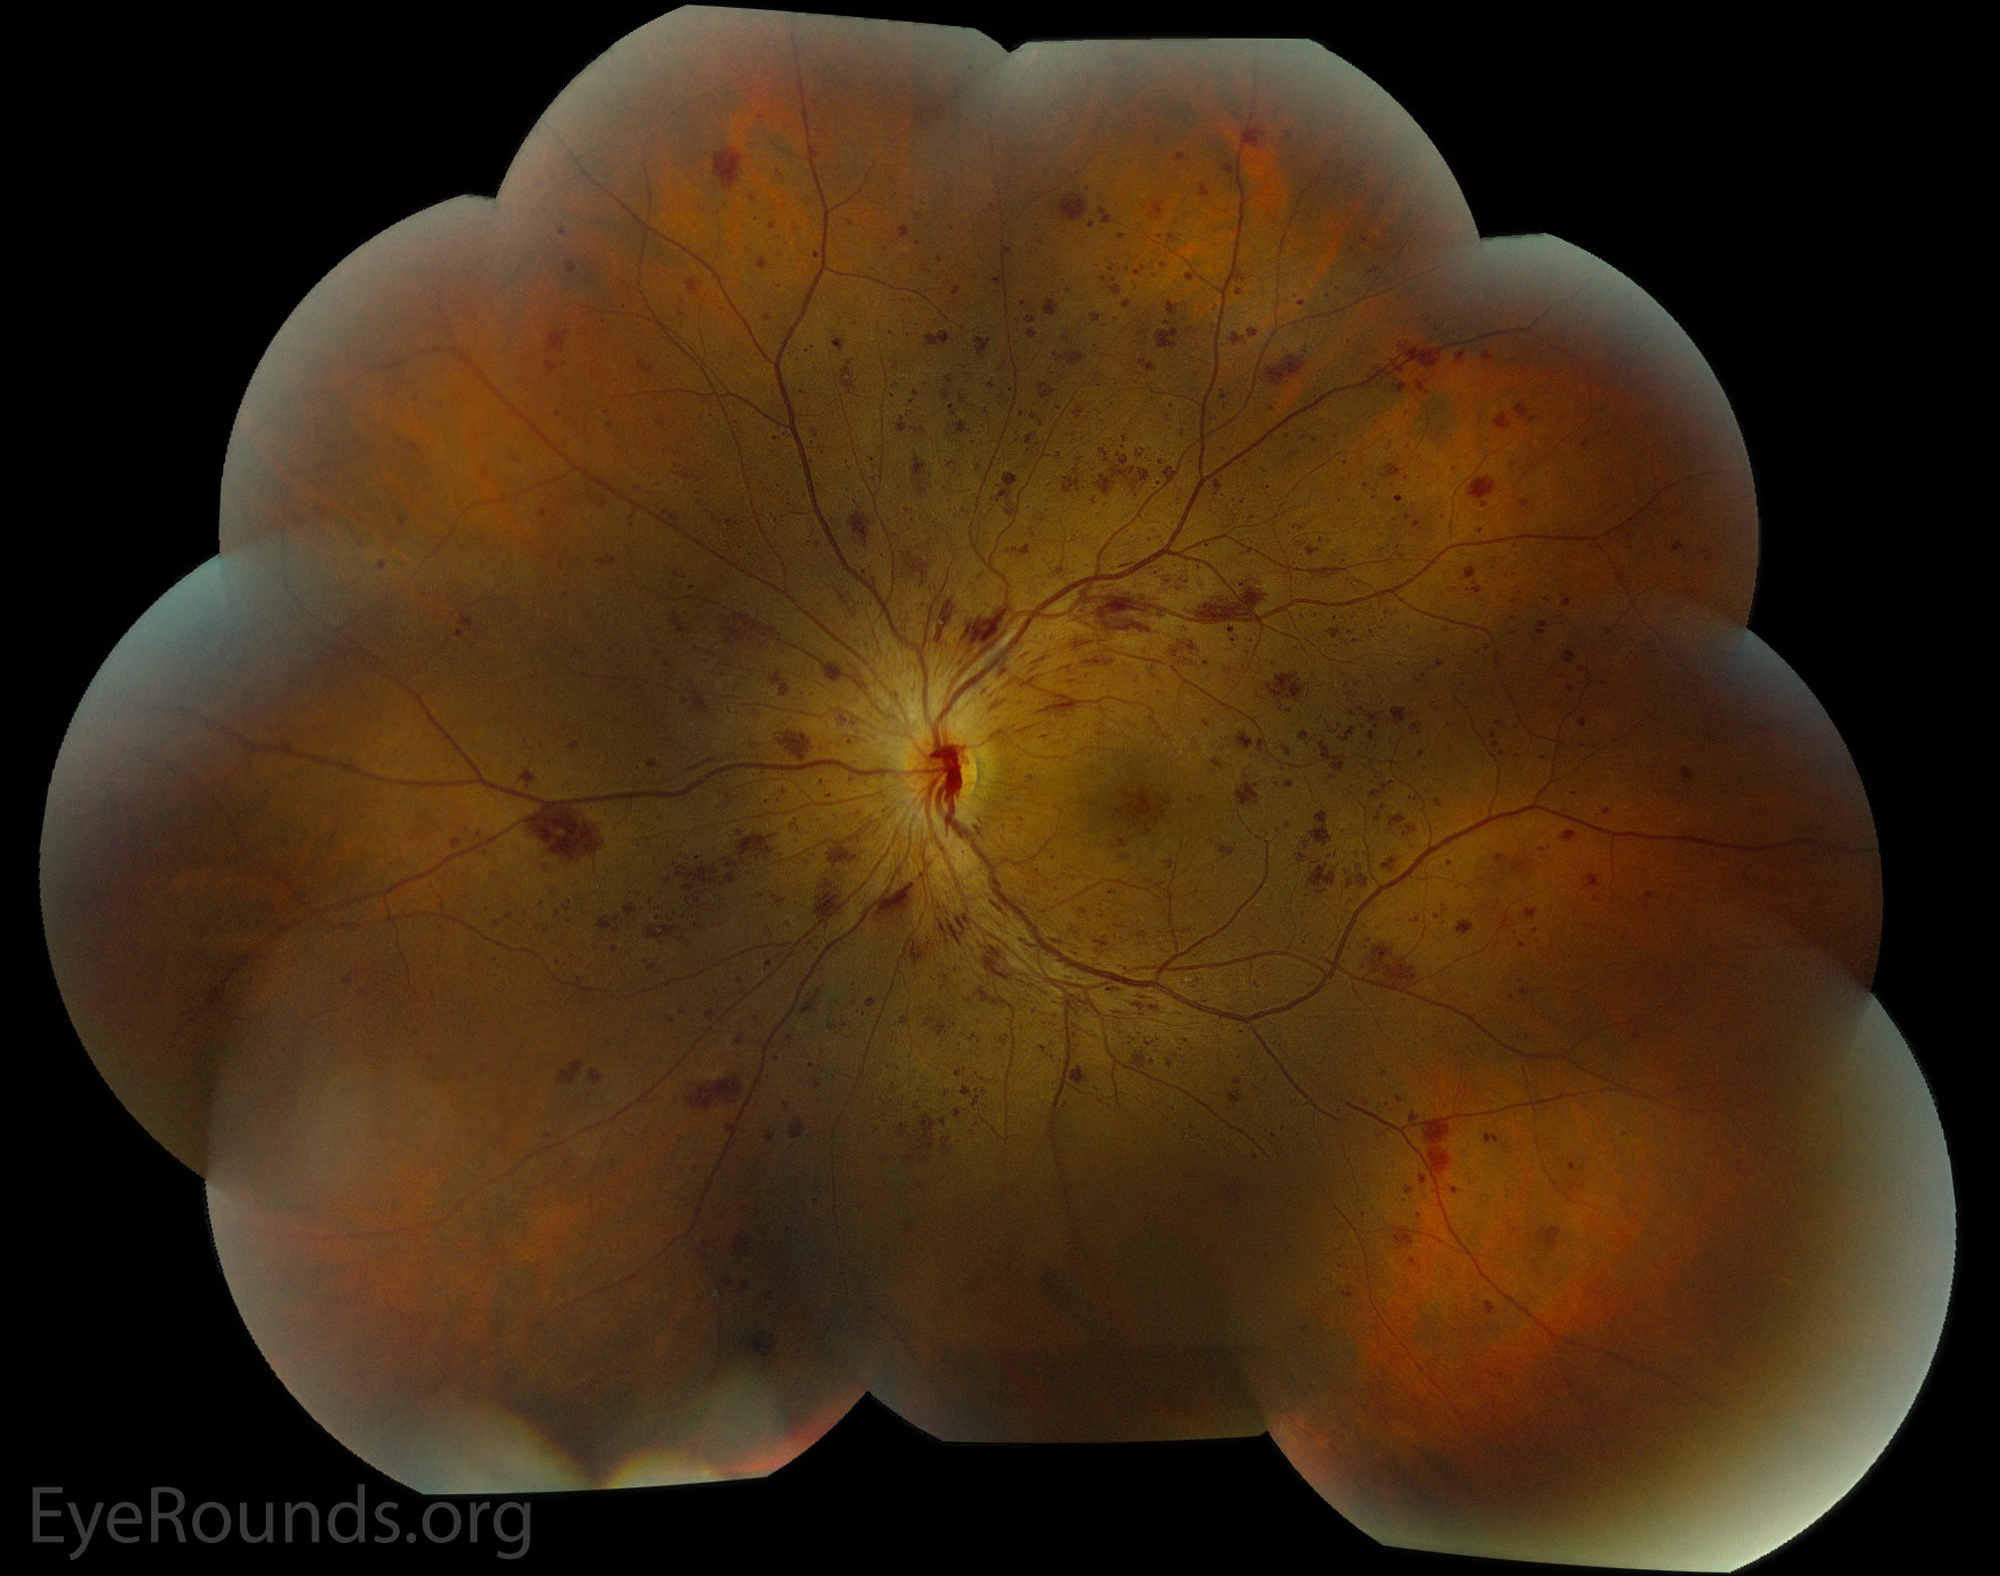 there is a pre-retinal hemorrhage overlying the optic nerve and tracking inferiorly